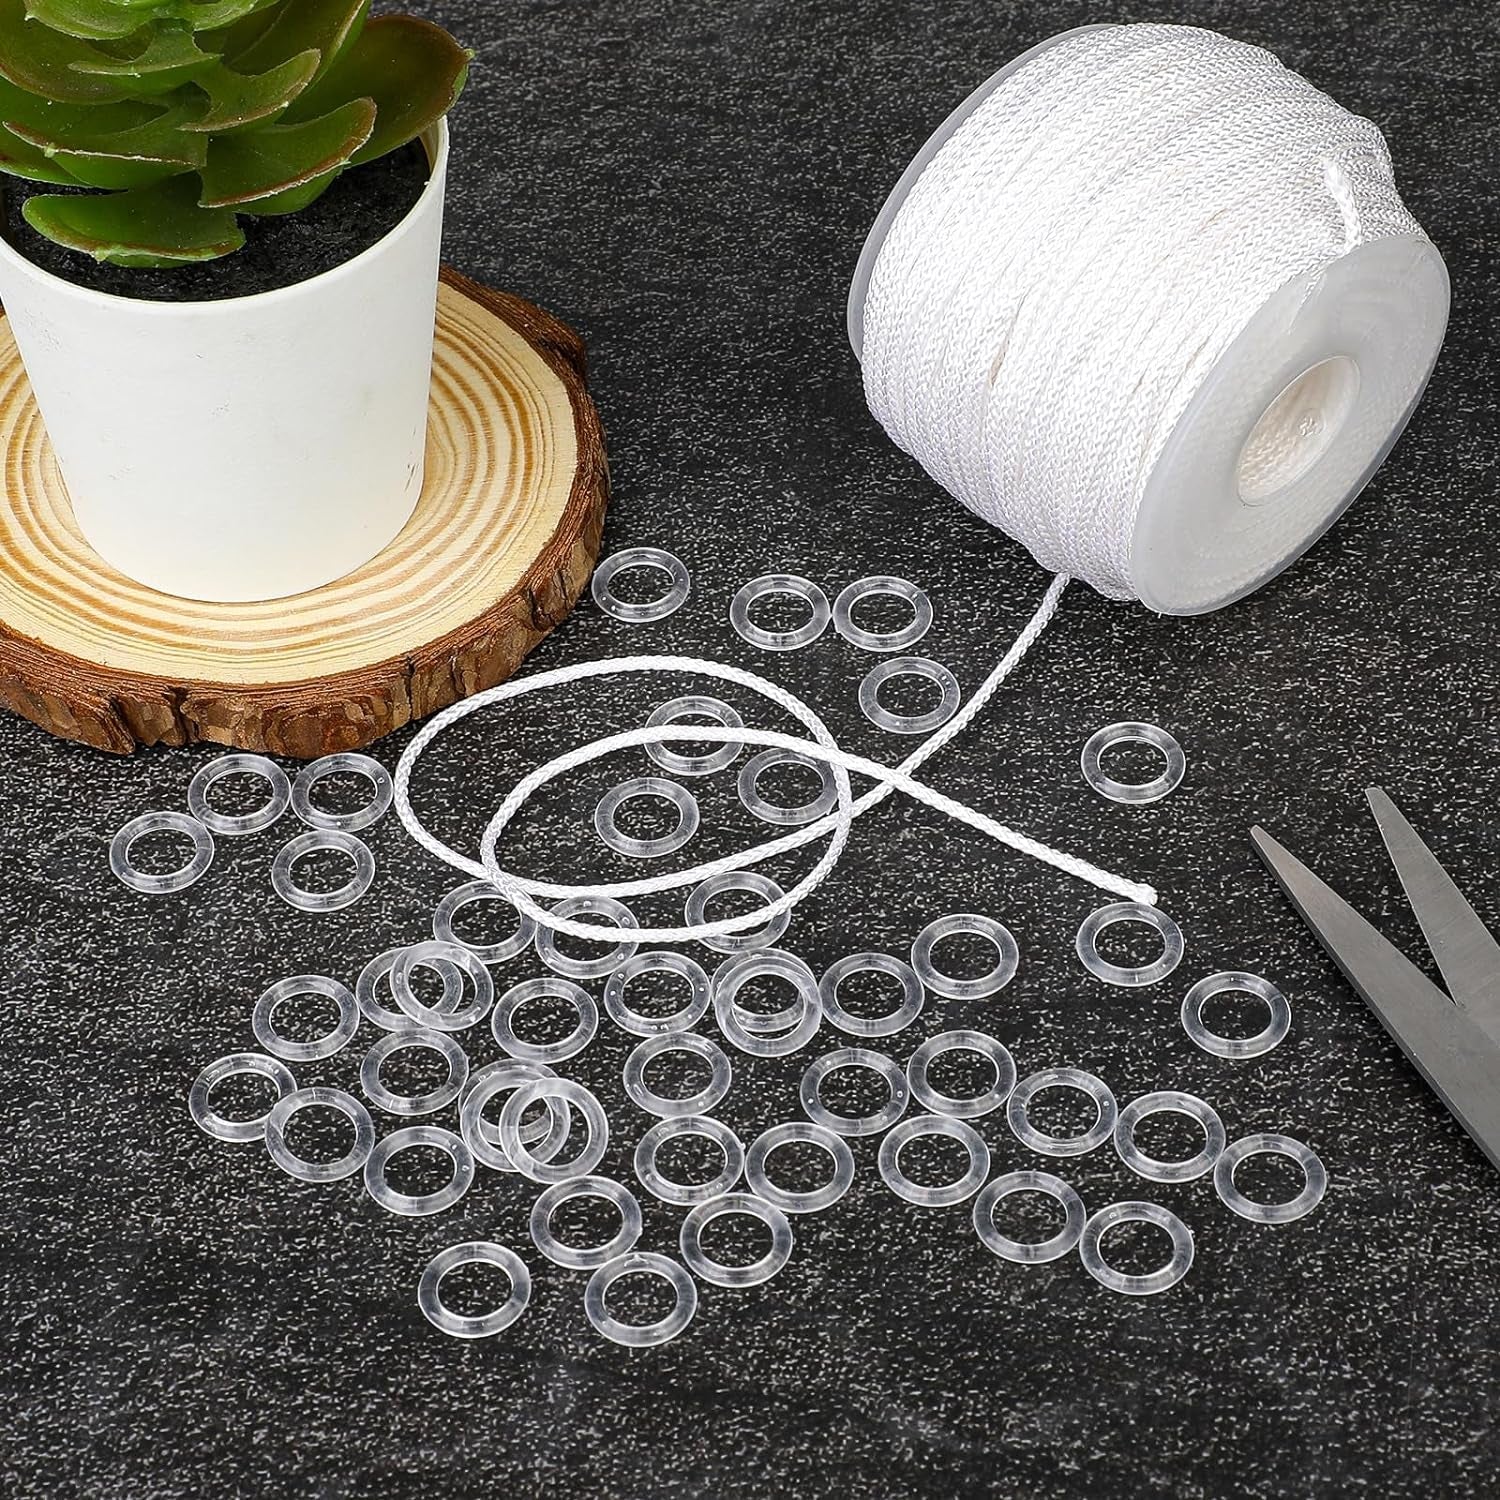 50 Pieces Clear Roman Rings Blind Curtain and 55 Yards Roman Blind Cord,Blind Roman Ring Transparent O-Rings Plastic Rings for Roman Shades, White Braided Lift Shade Cord for DIY Roman Curtains Blinds